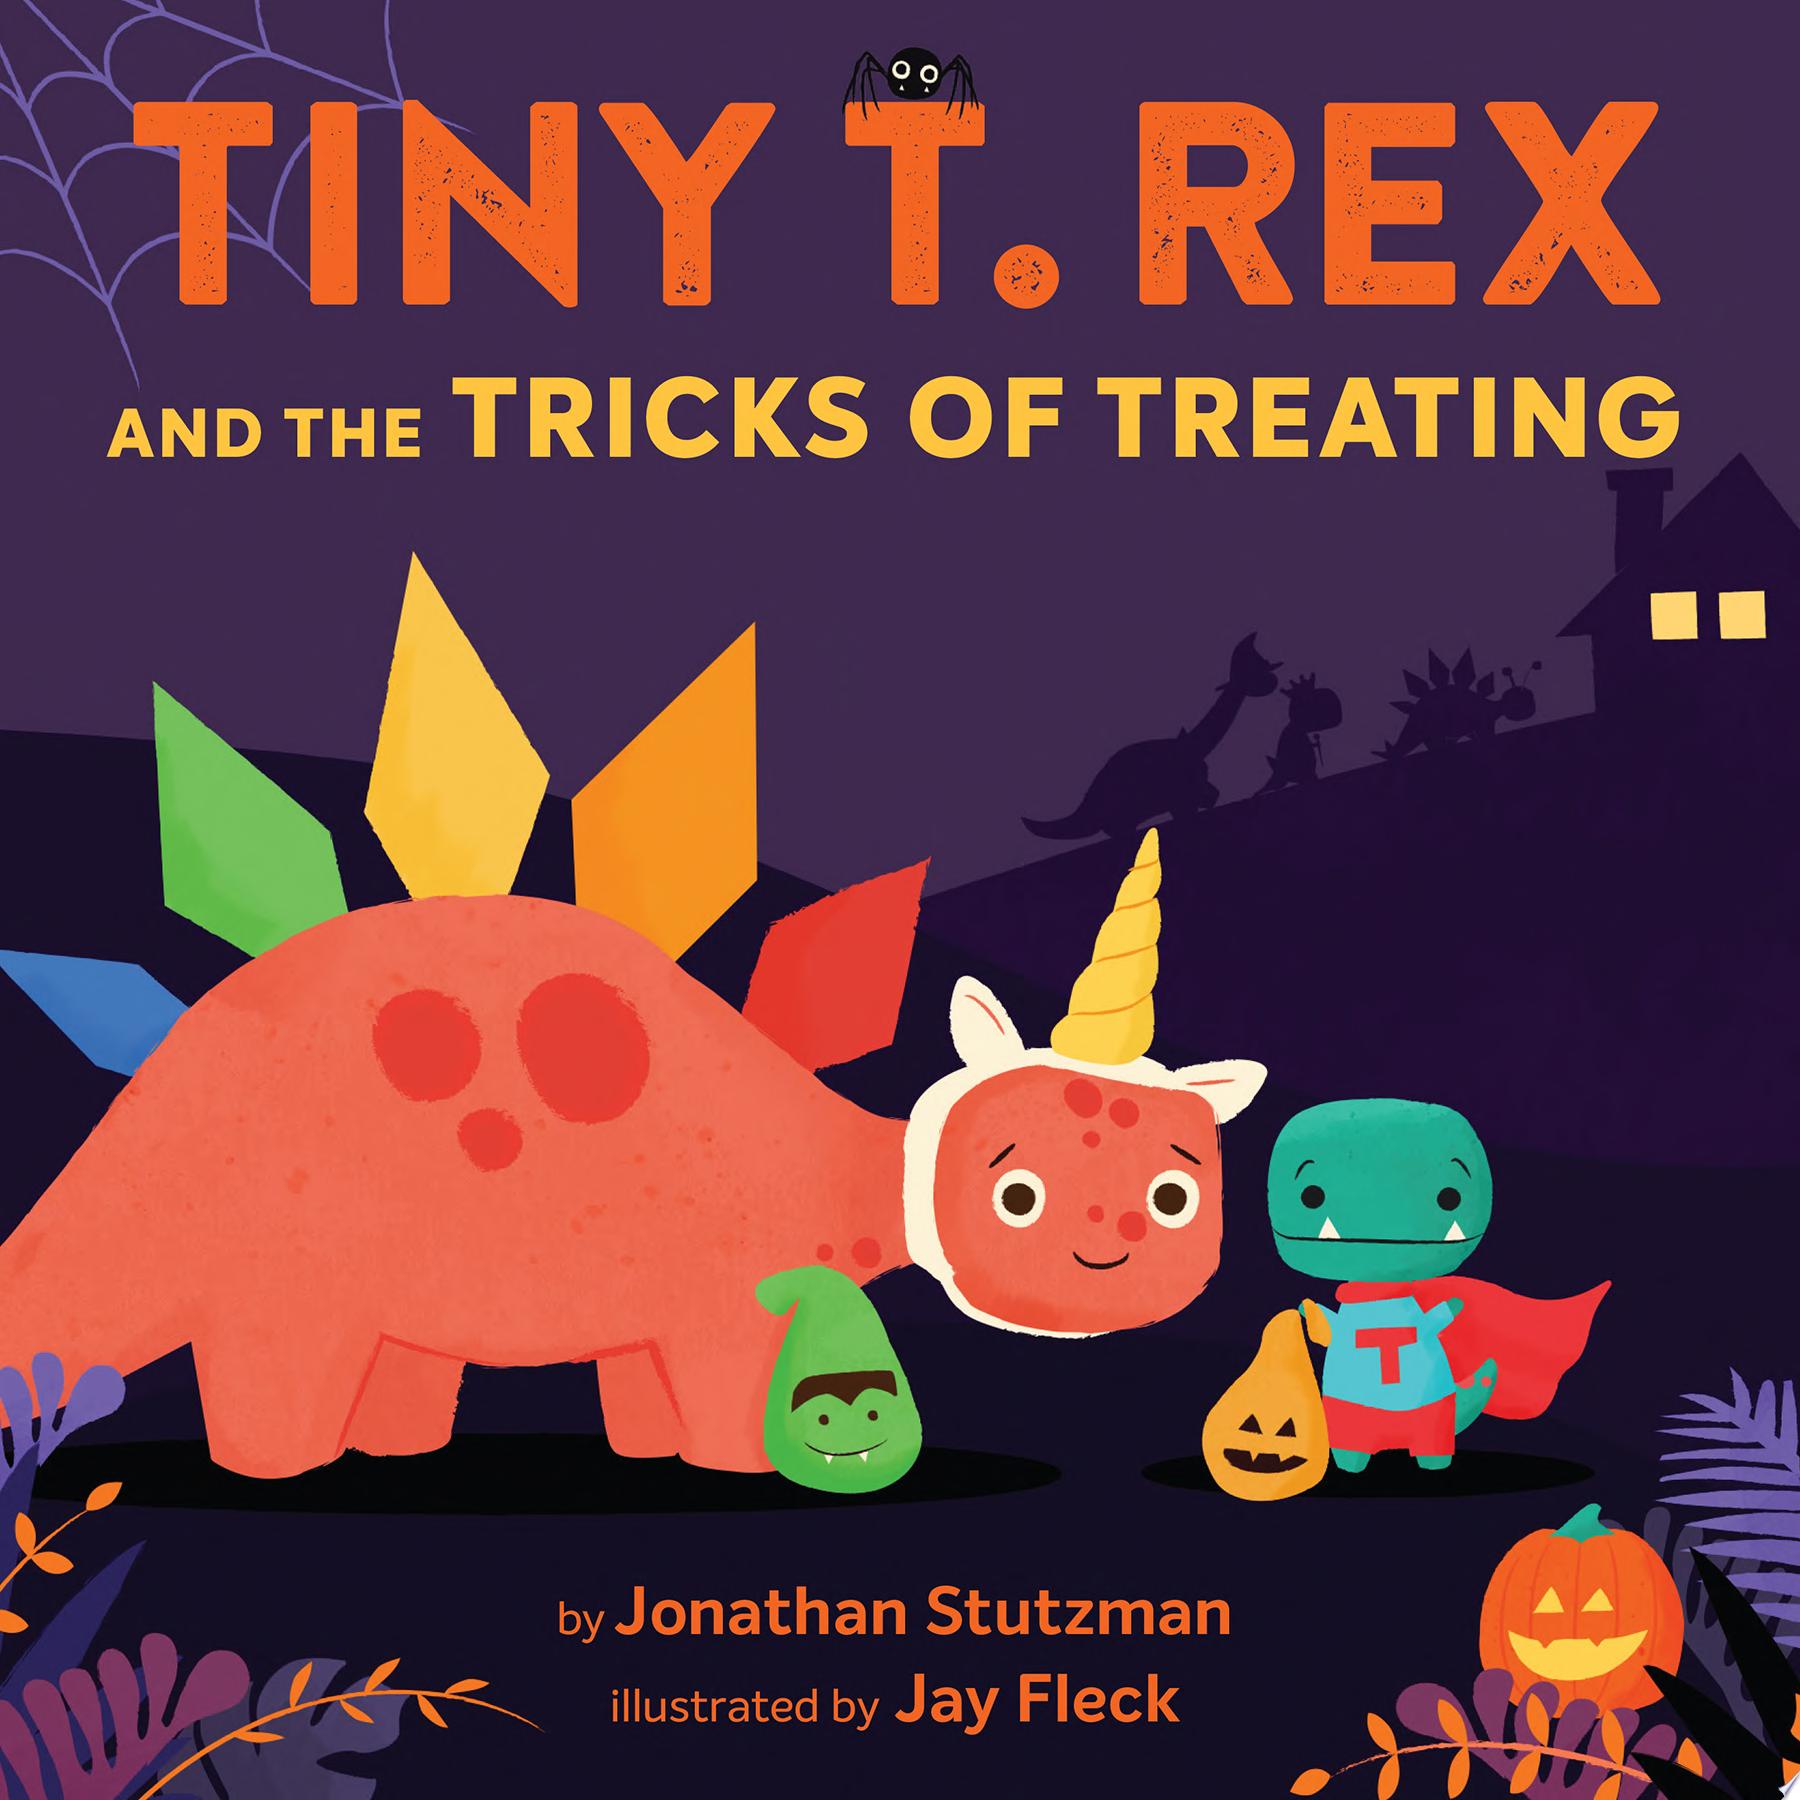 Image for "Tiny T. Rex and the Tricks of Treating"